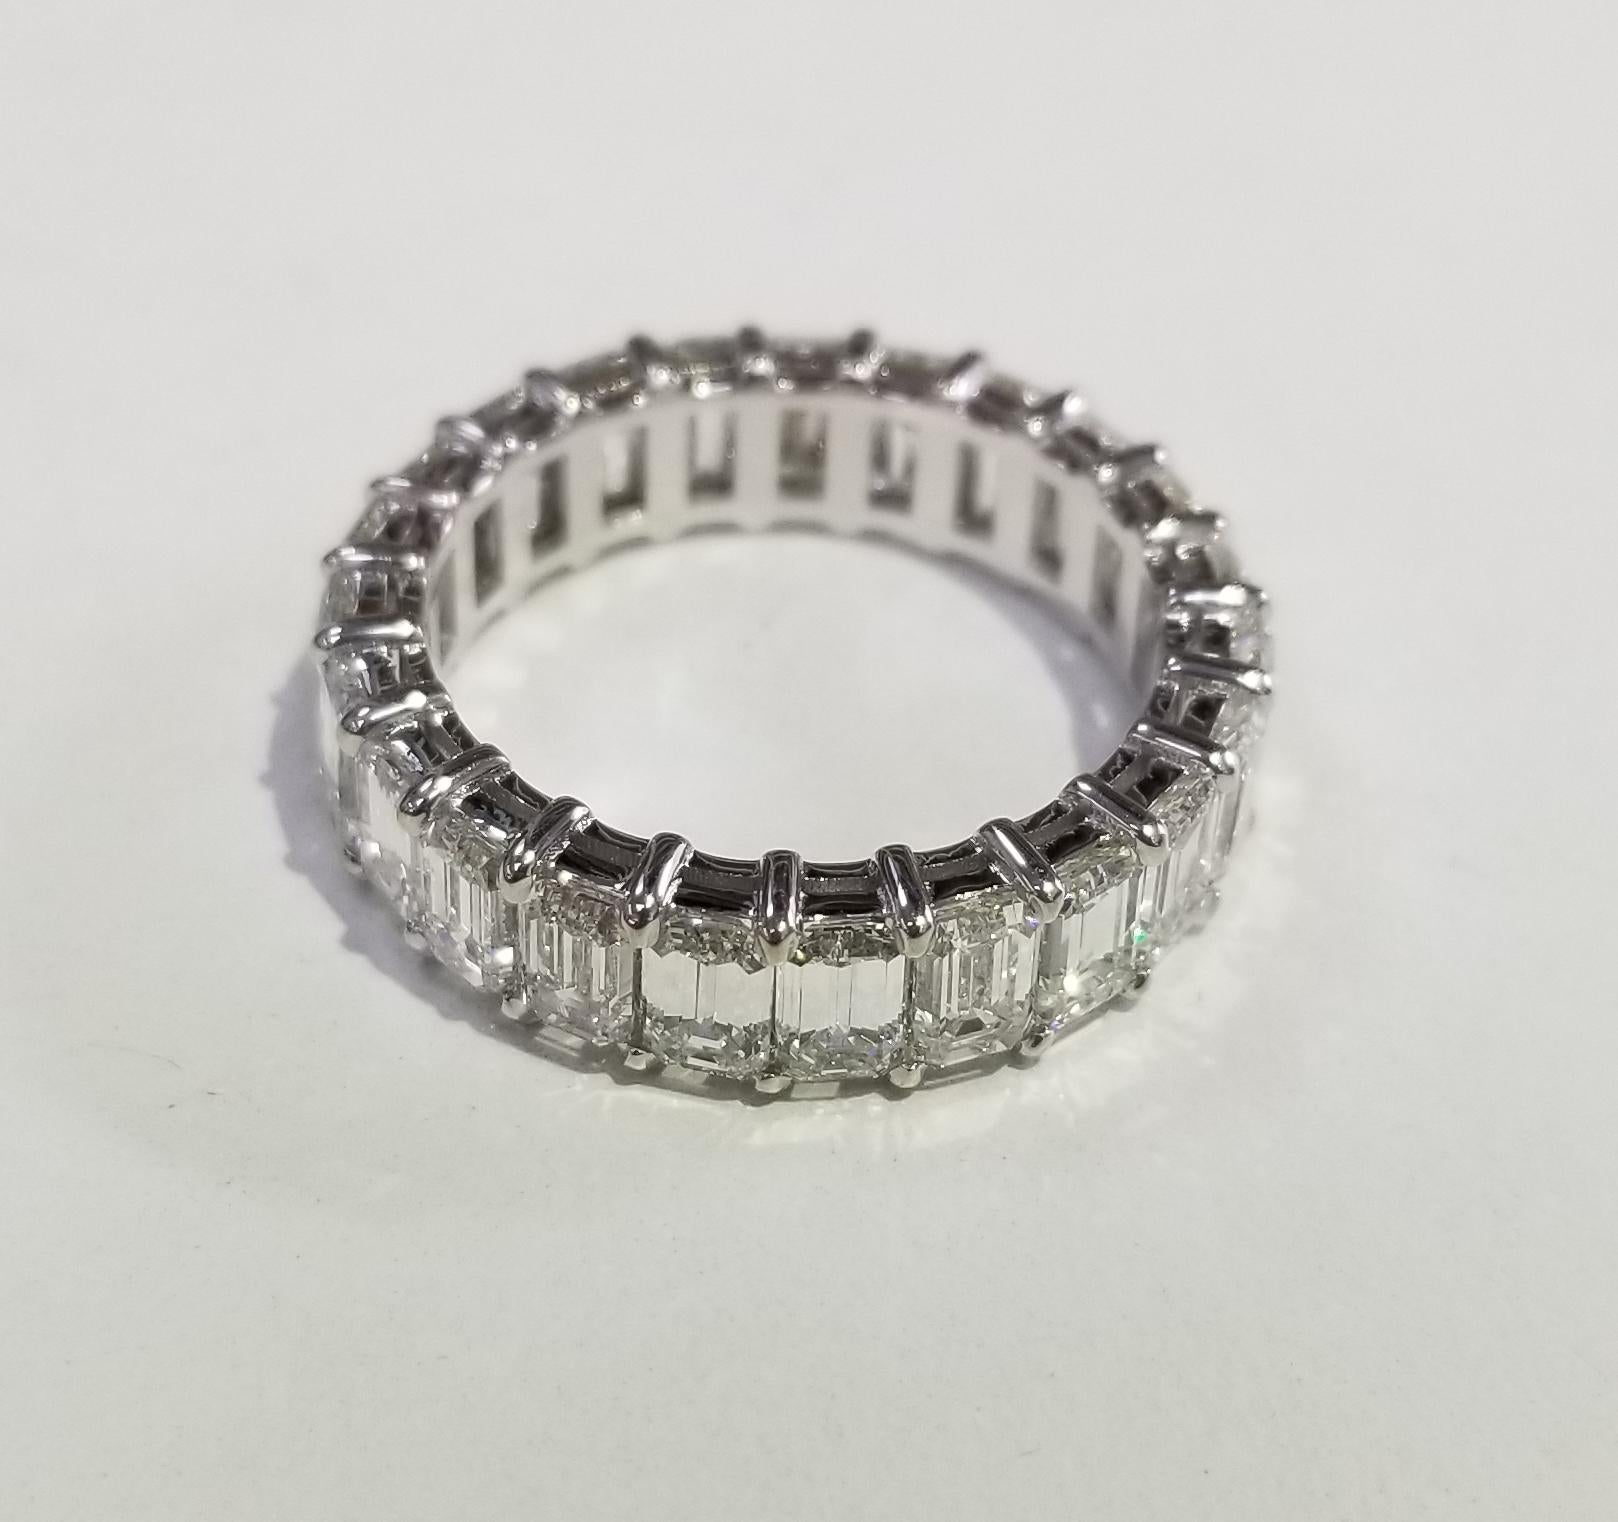 A breathtakingly beautiful diamond wedding band featuring 23 emerald cut diamonds set in 14k white gold weighing 7.25carats. These spectacular diamonds are G in color, VS1-2  clarity. This seamless eternity band is expertly crafted surely will catch